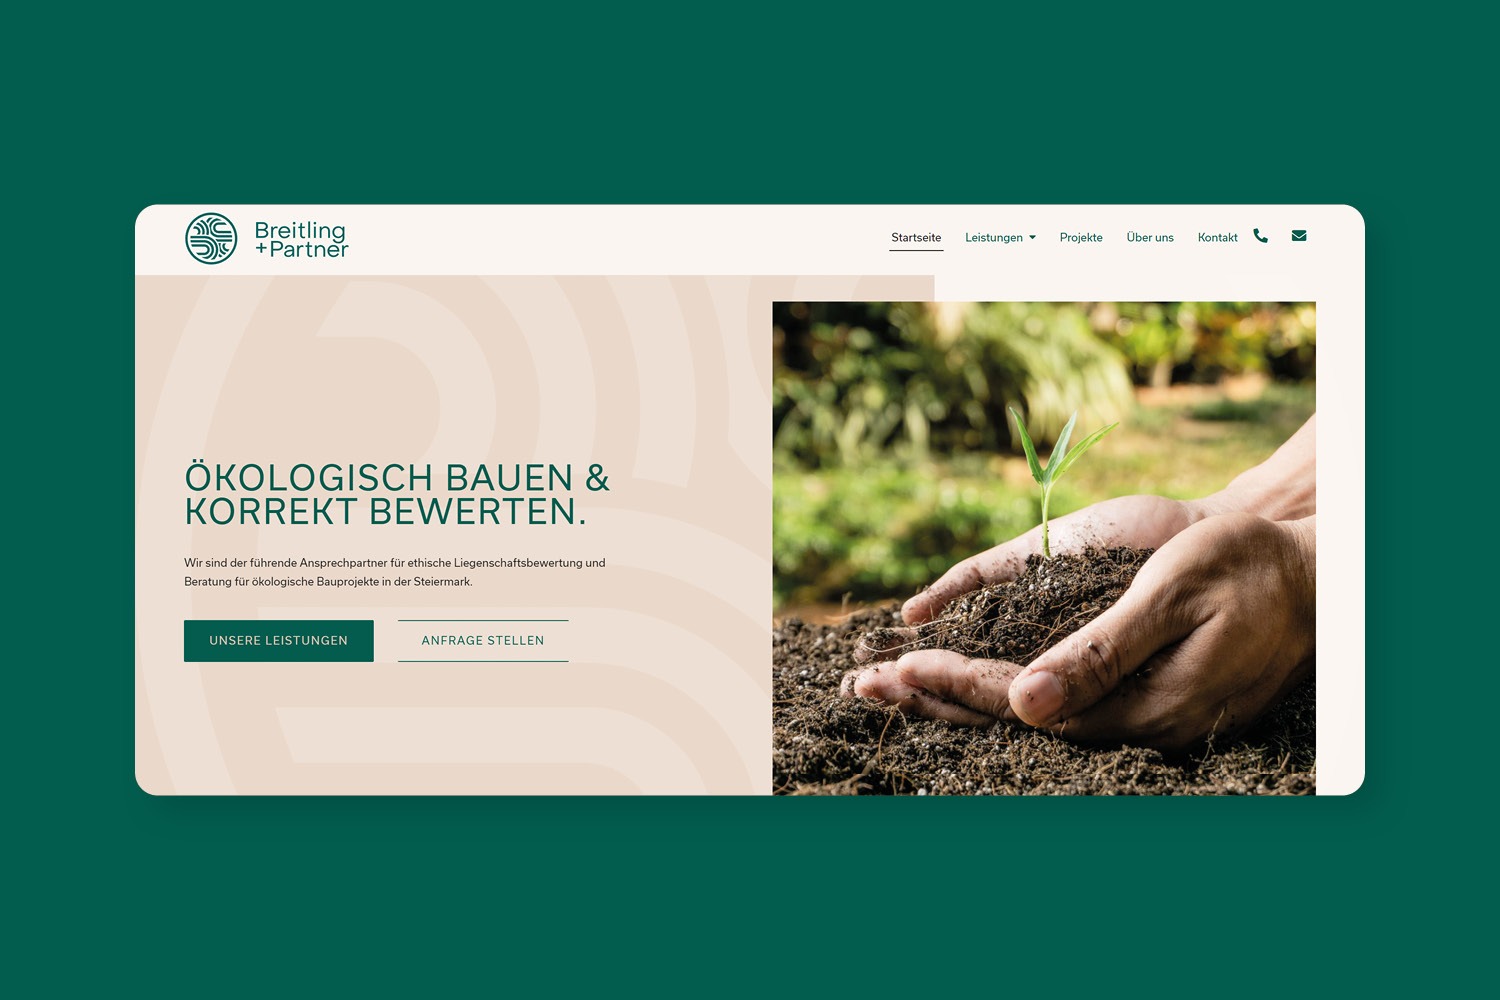 A website design featuring a plant being held by a hand by Breitling+Partner.